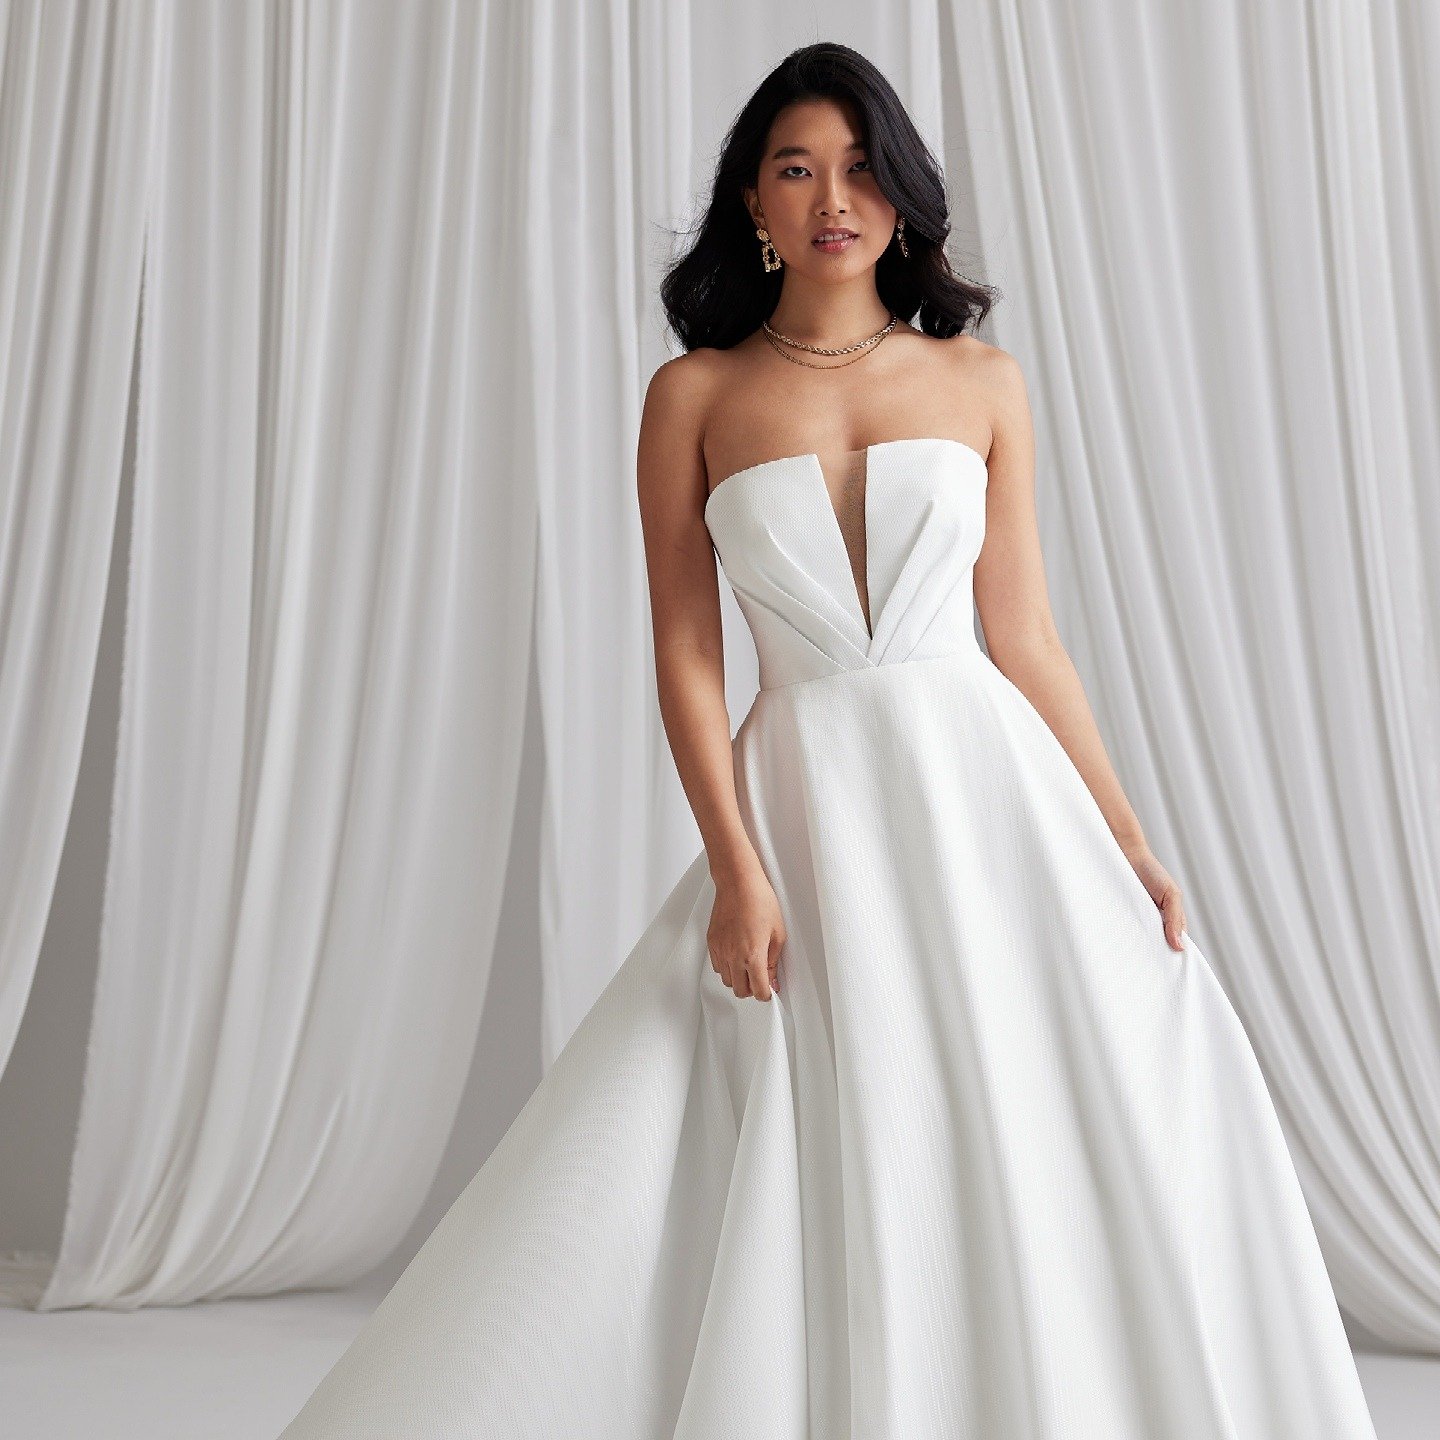 Just In / Nouveaut&eacute; Maggie Sottero!!! 🤍🤍🤍
...
OMG!!! Welcome to our store Amber Marie!!! 😍 This classic yet modern wedding dress is crafted with a luxurious diamond jacquard and features a pleated front bodice with a deep V neckline. The b